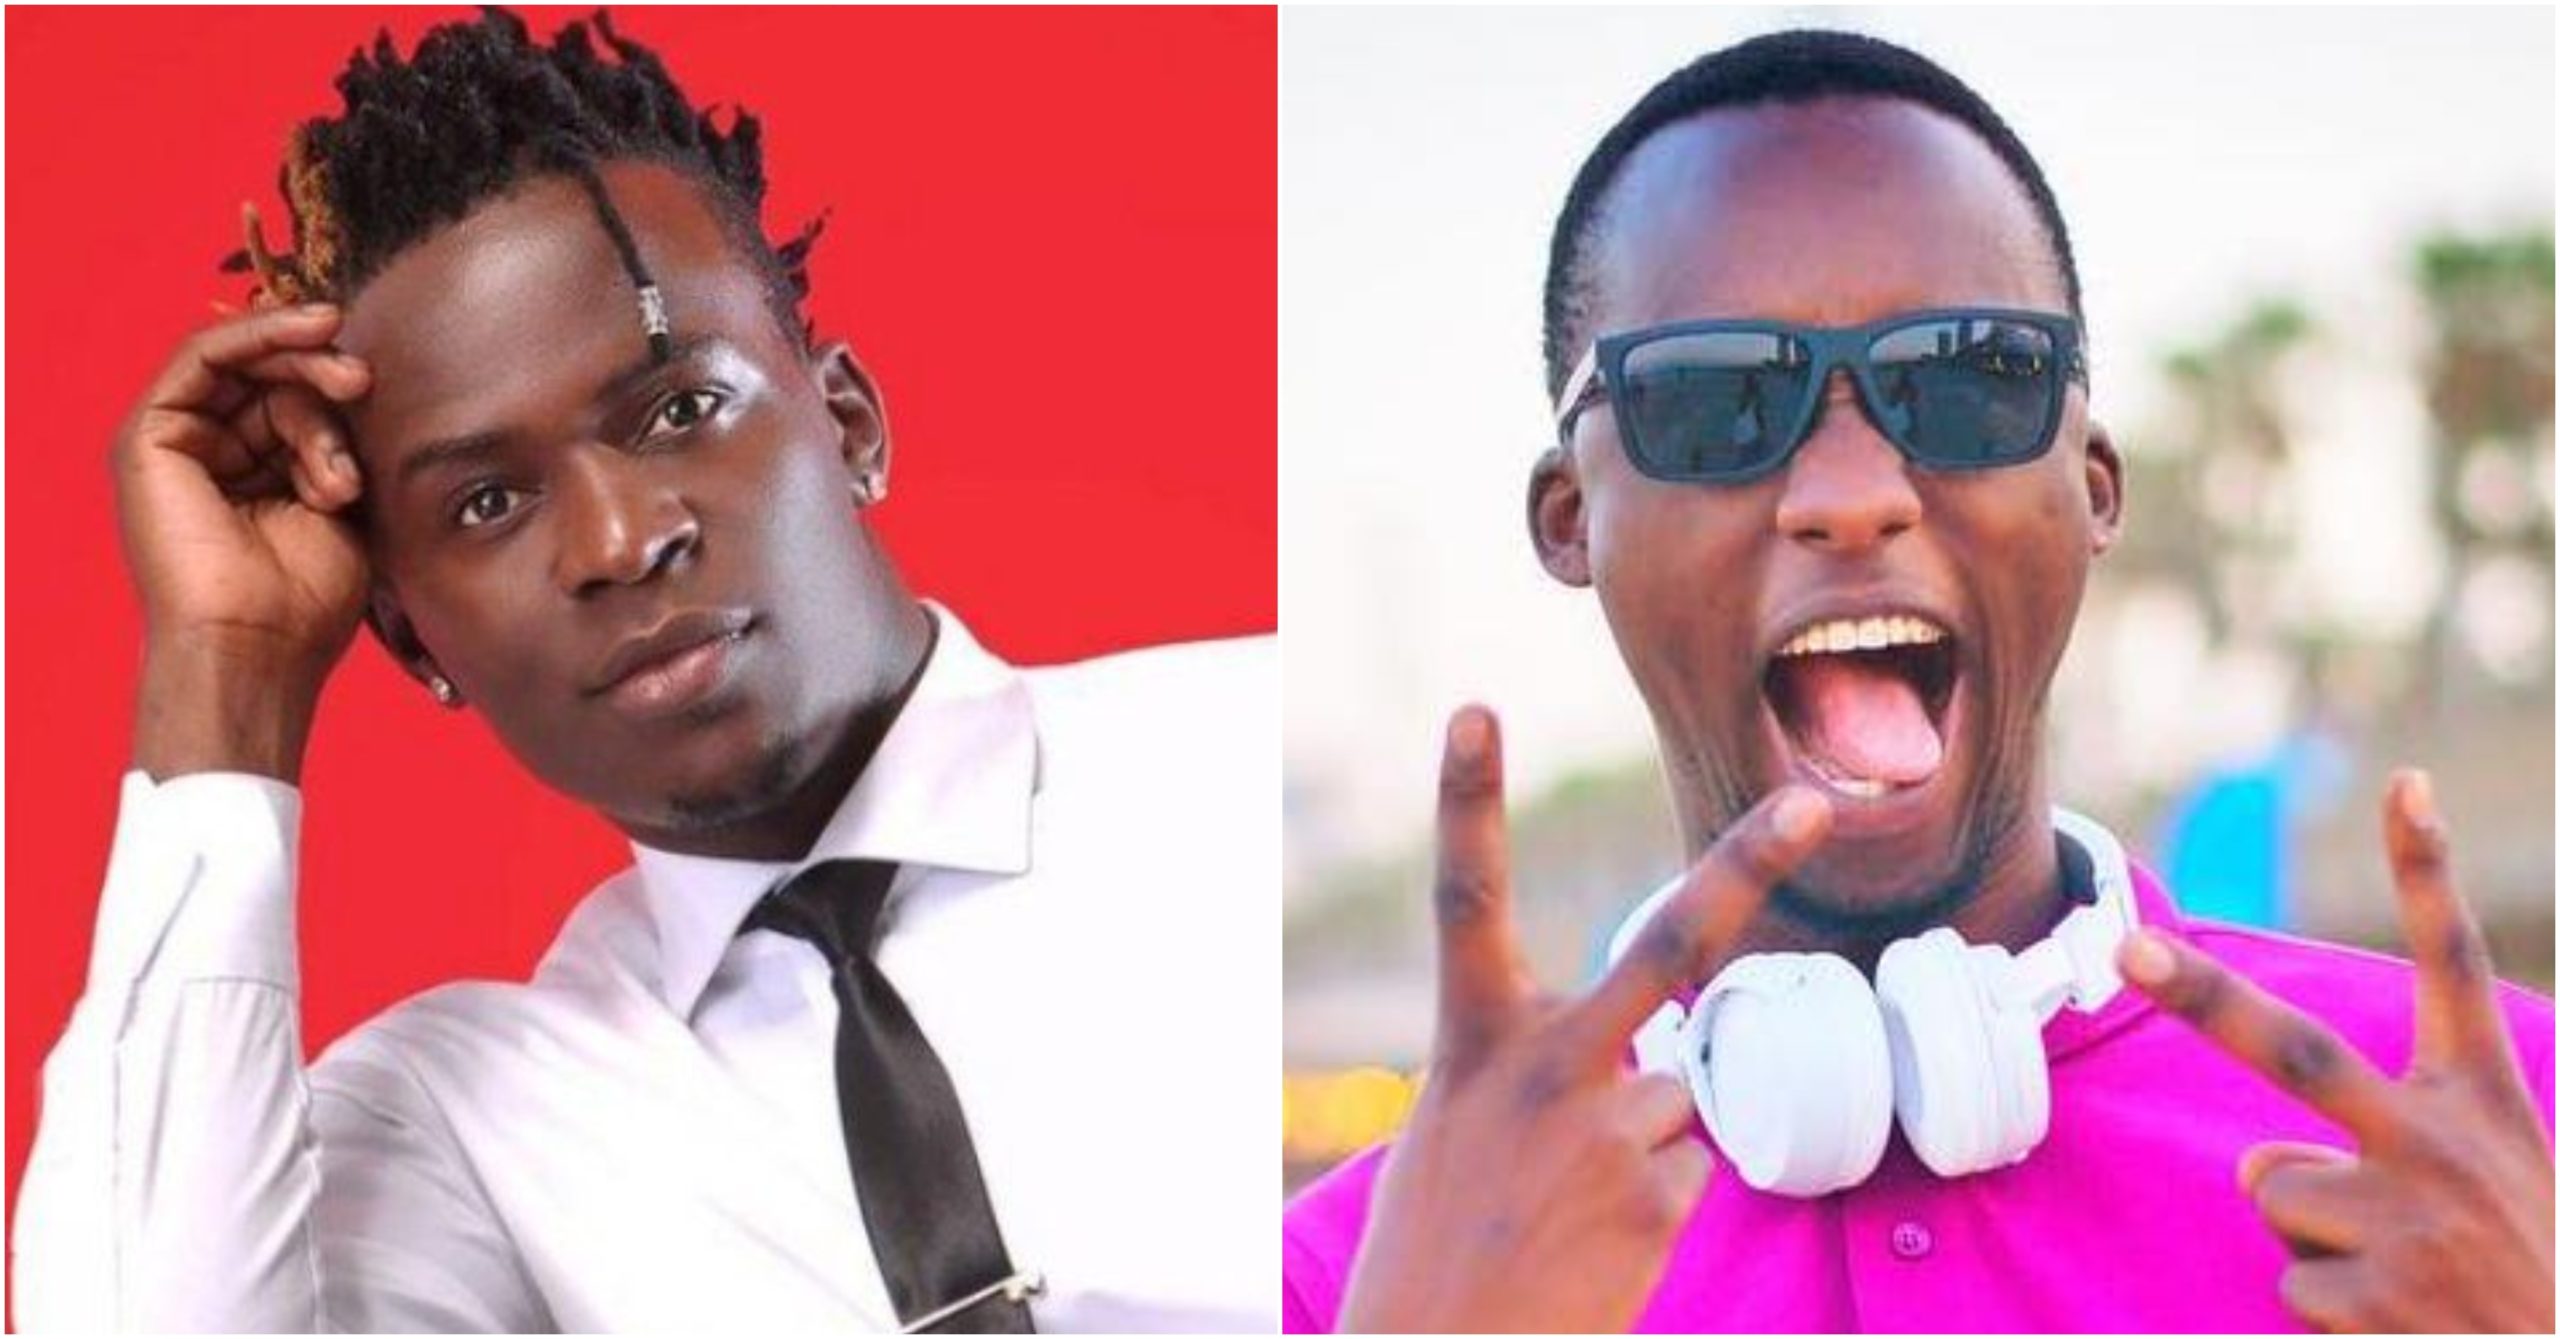 Xtian Dela exposes the ugly side of Kenyan gospel artistes that saw him quit the industry (Video)